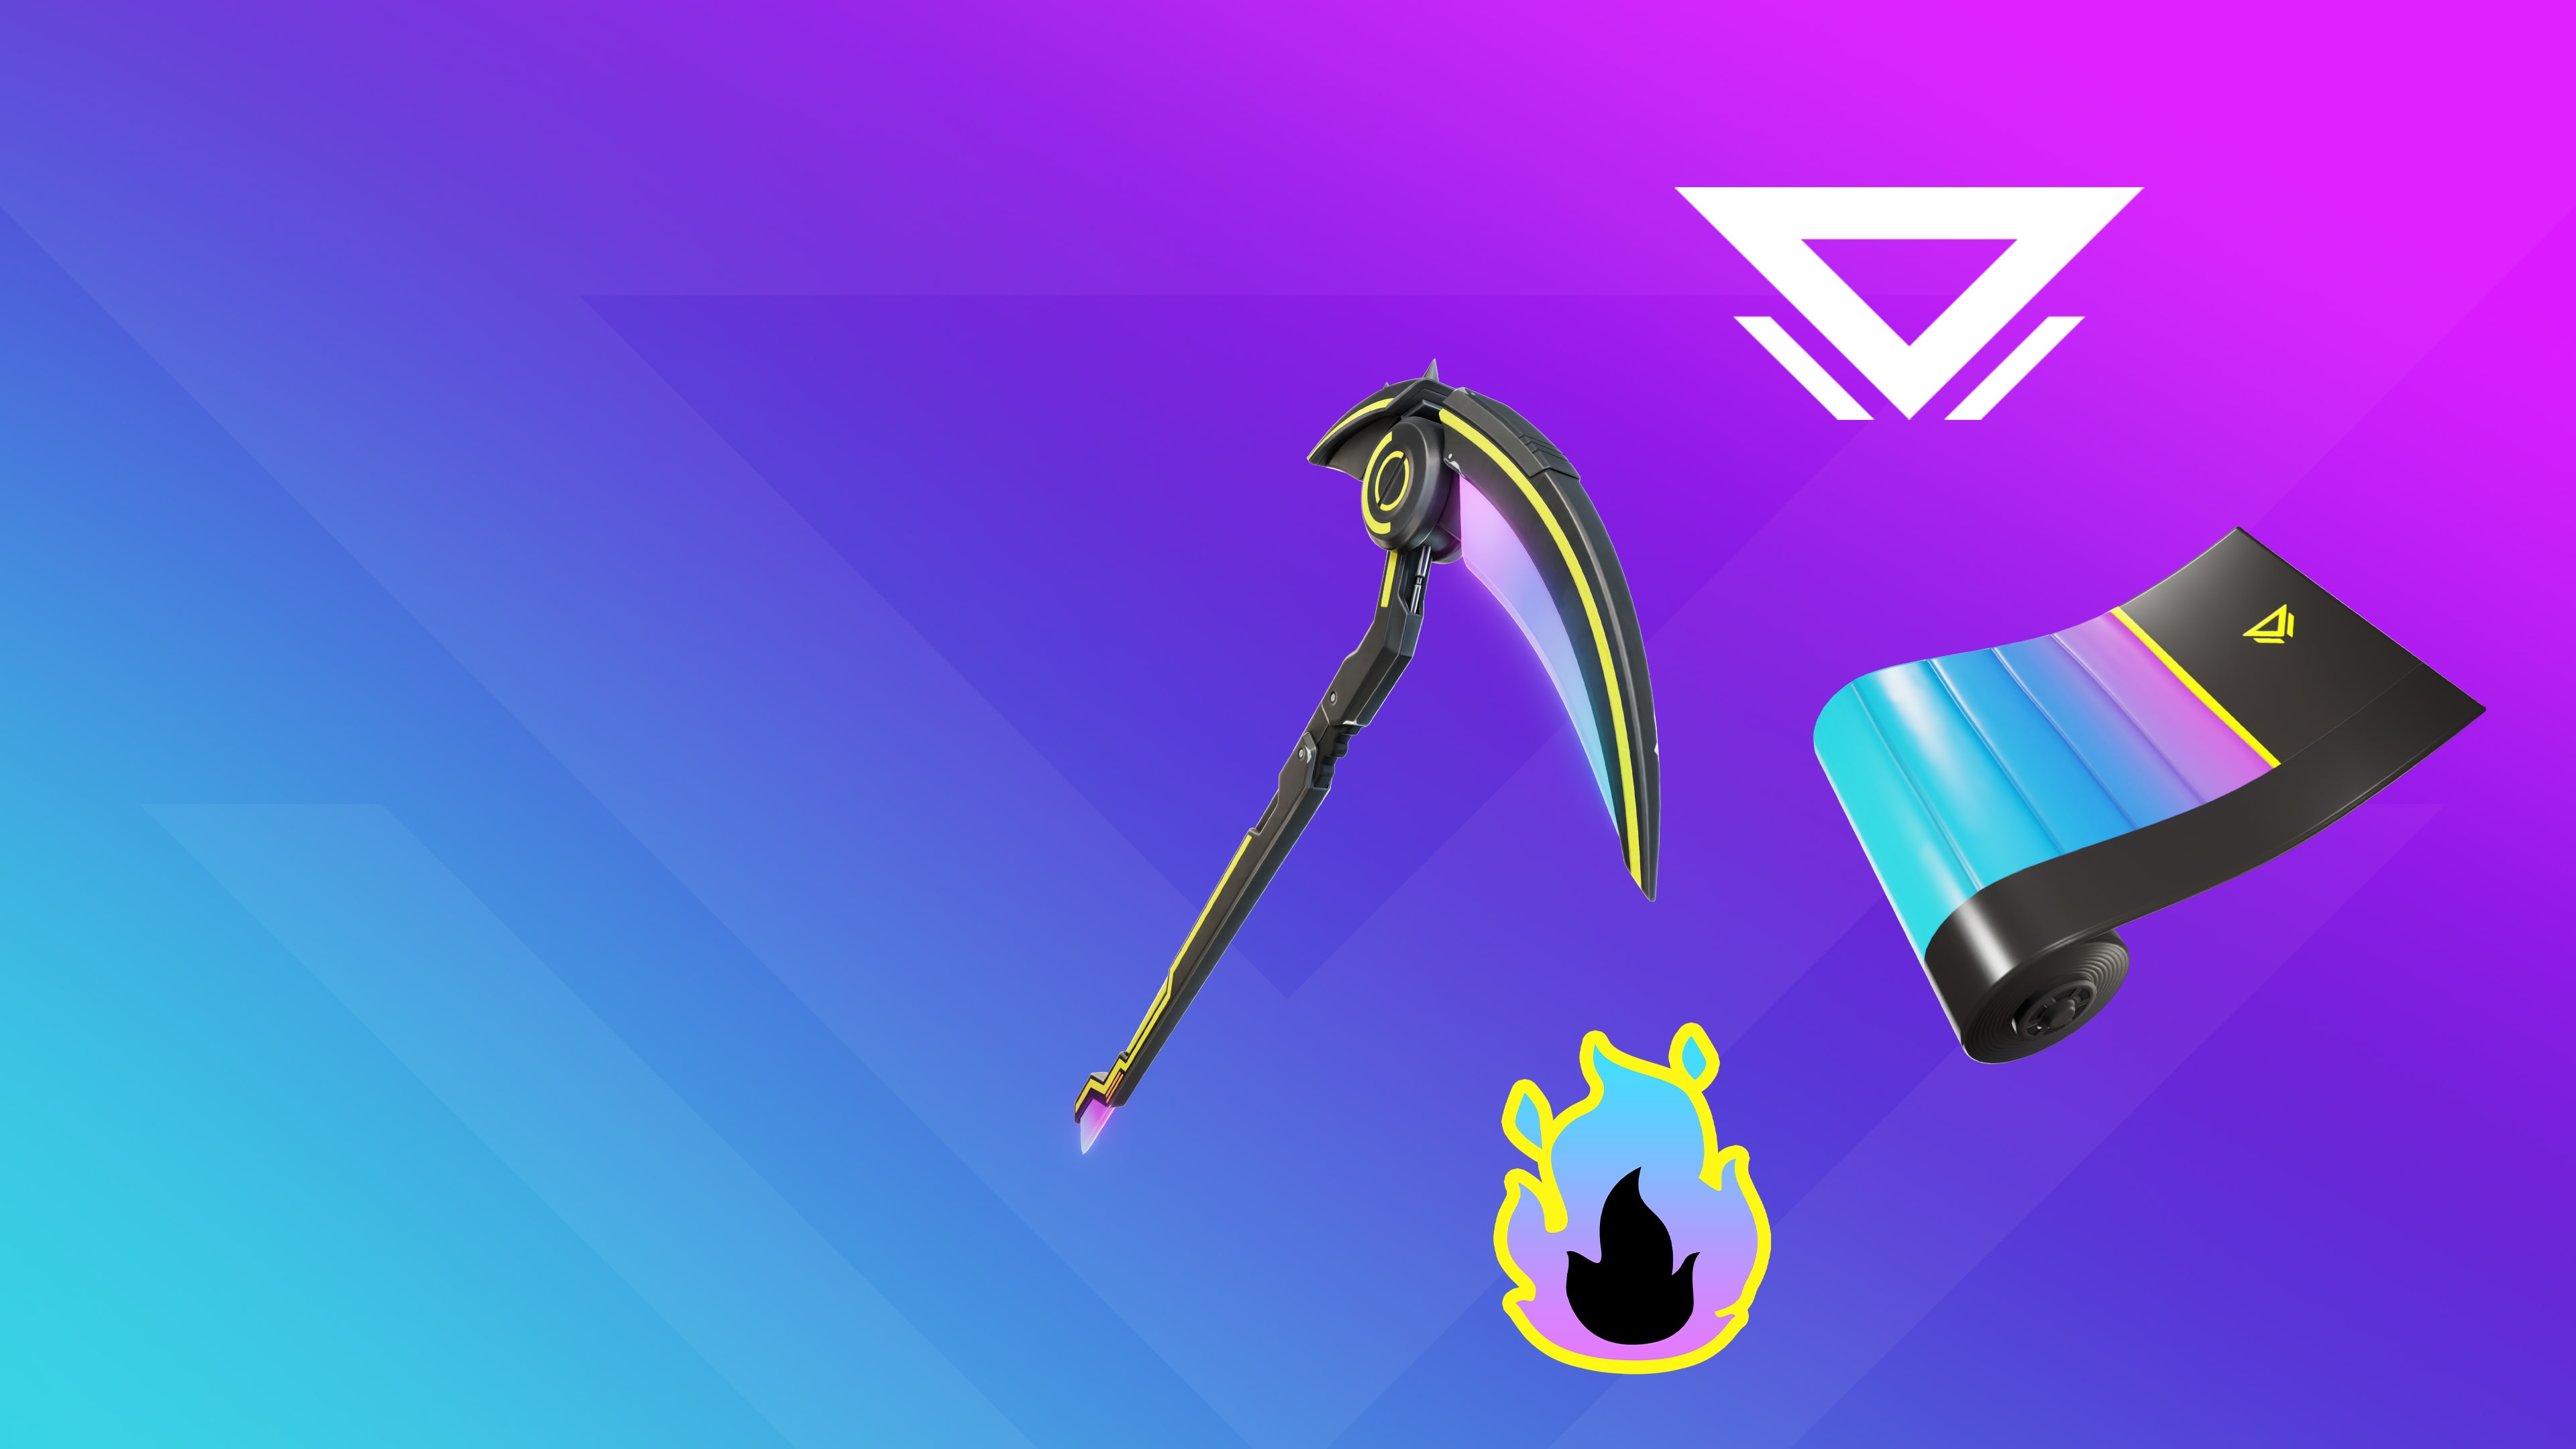 Fortnite - Chilling Mystery Gear Pack